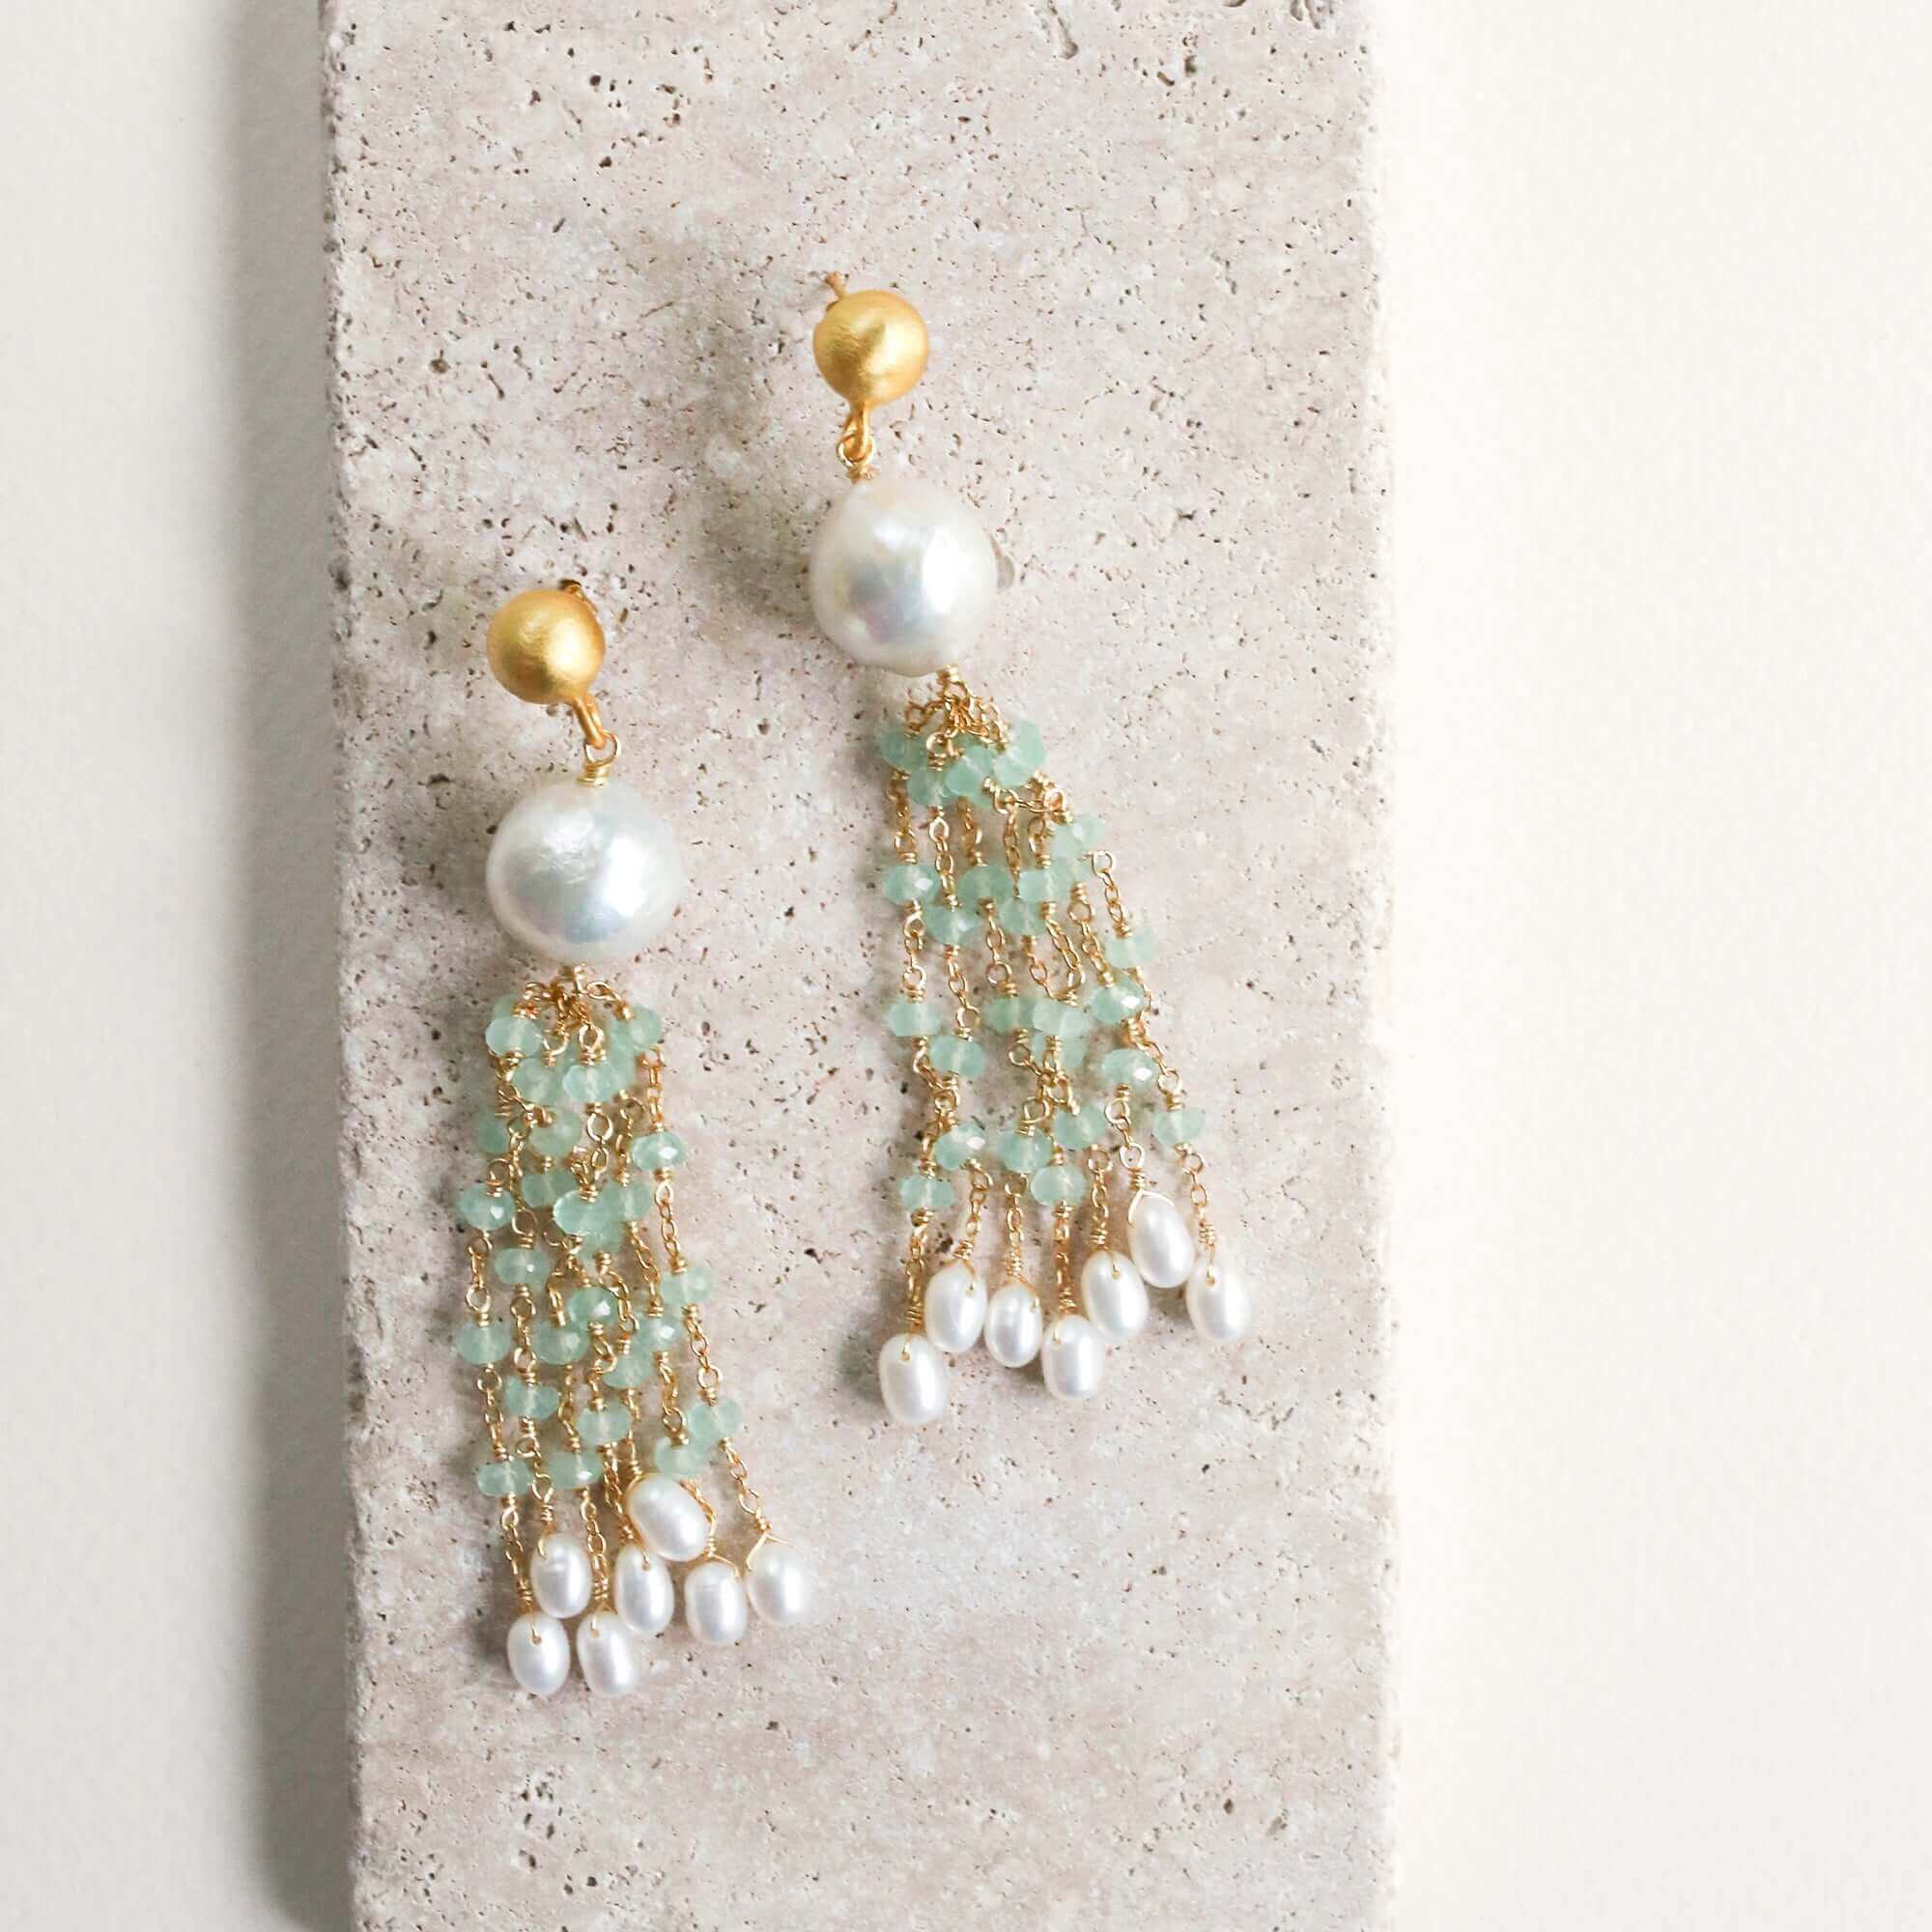 Freshwater baroque pearls, aqua chalcedony and bead pearls Tassel Earrings in Gold plated Italian Silver